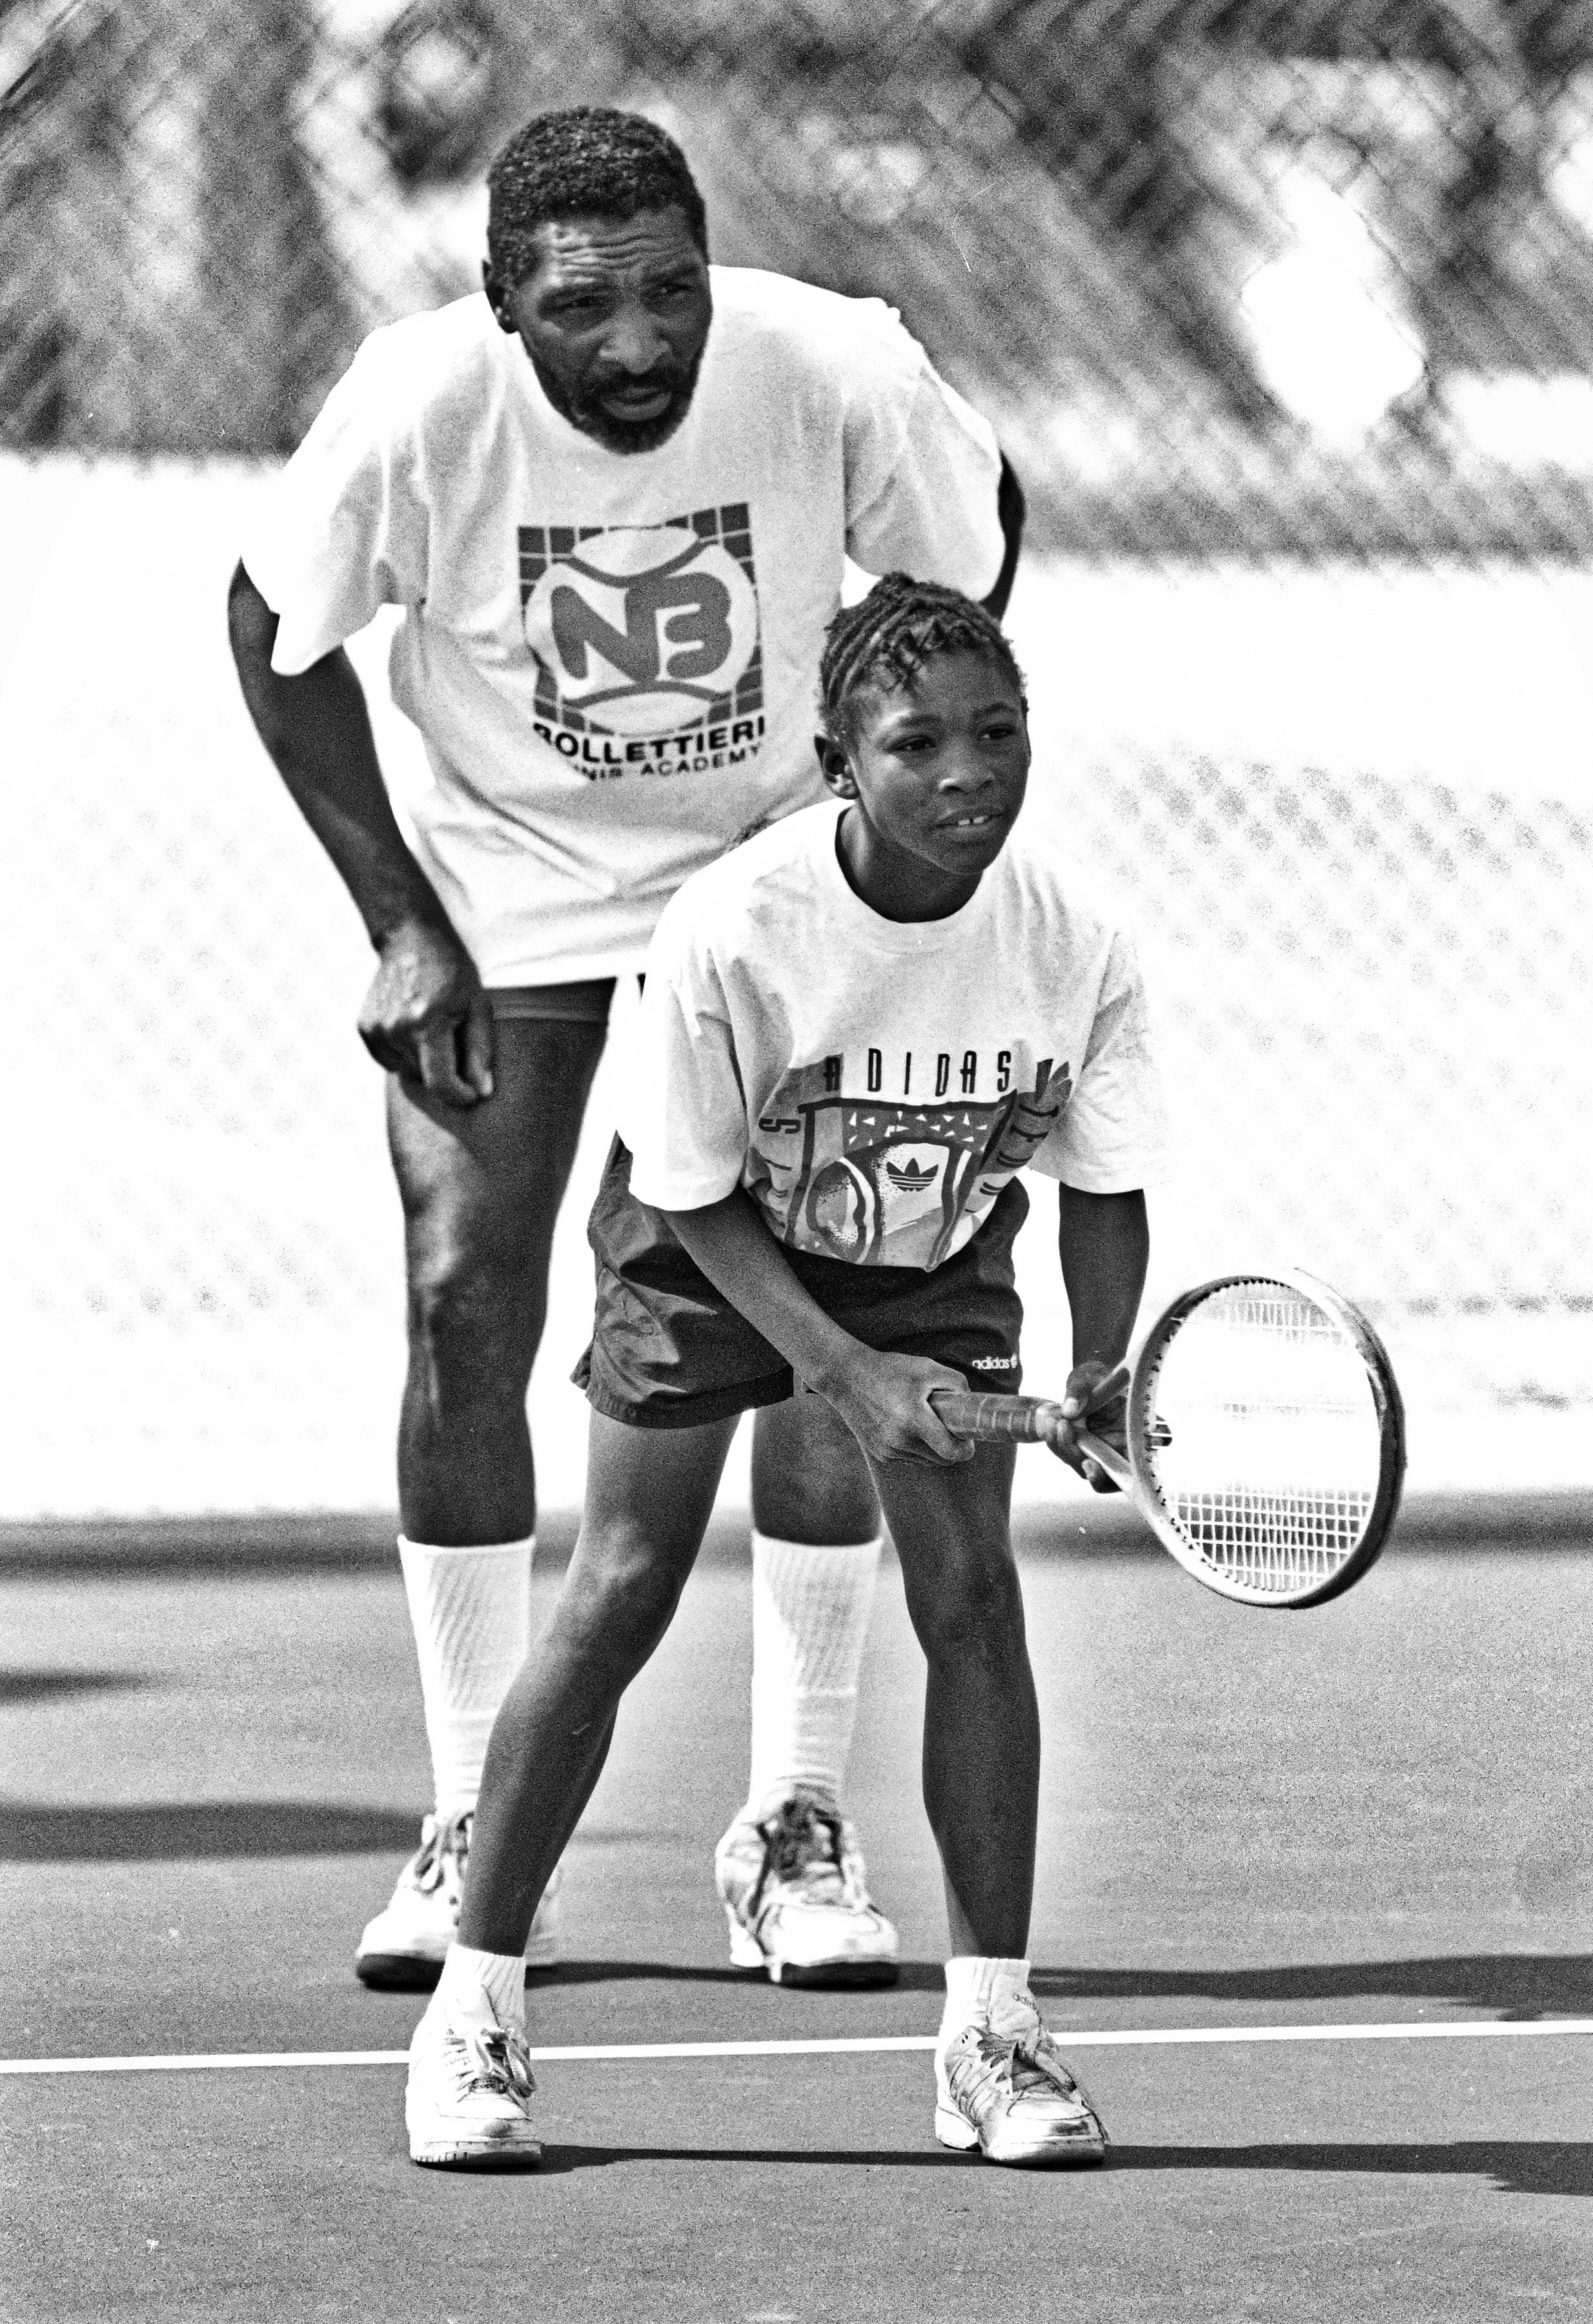  Richard WIlliams is pictured with his daughter, Serena, during a training session at the Compton tennis courts on April 20, 1991, in South Central Los Angeles, California | Source: Getty Images